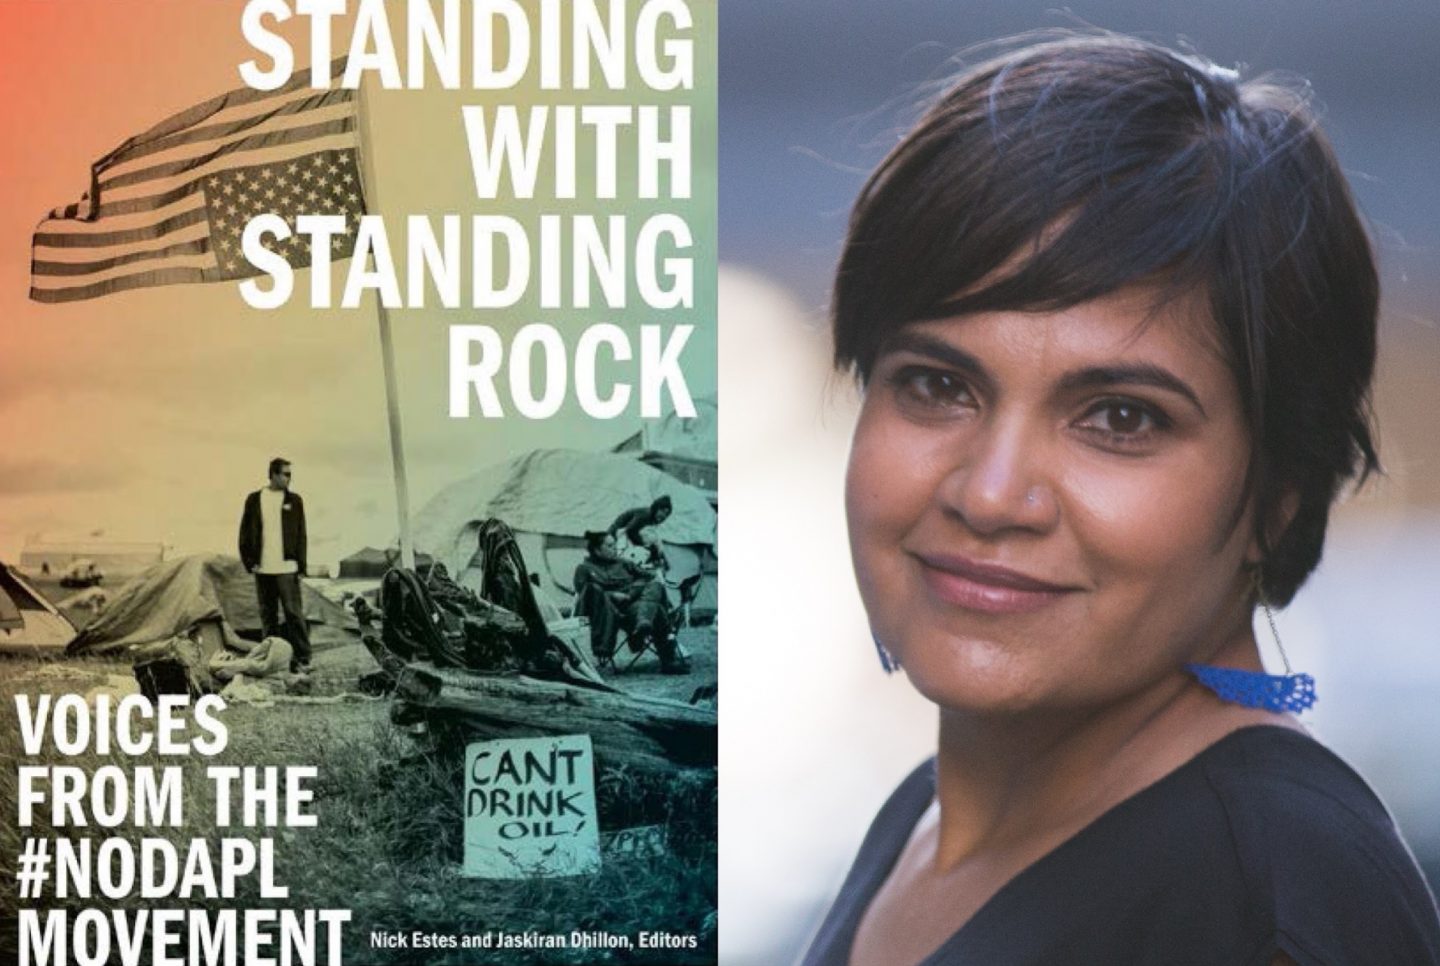 Jaskiran Dhillon's new book Standing with Standing Rock: Voices from the #NoDAPL Movement. 